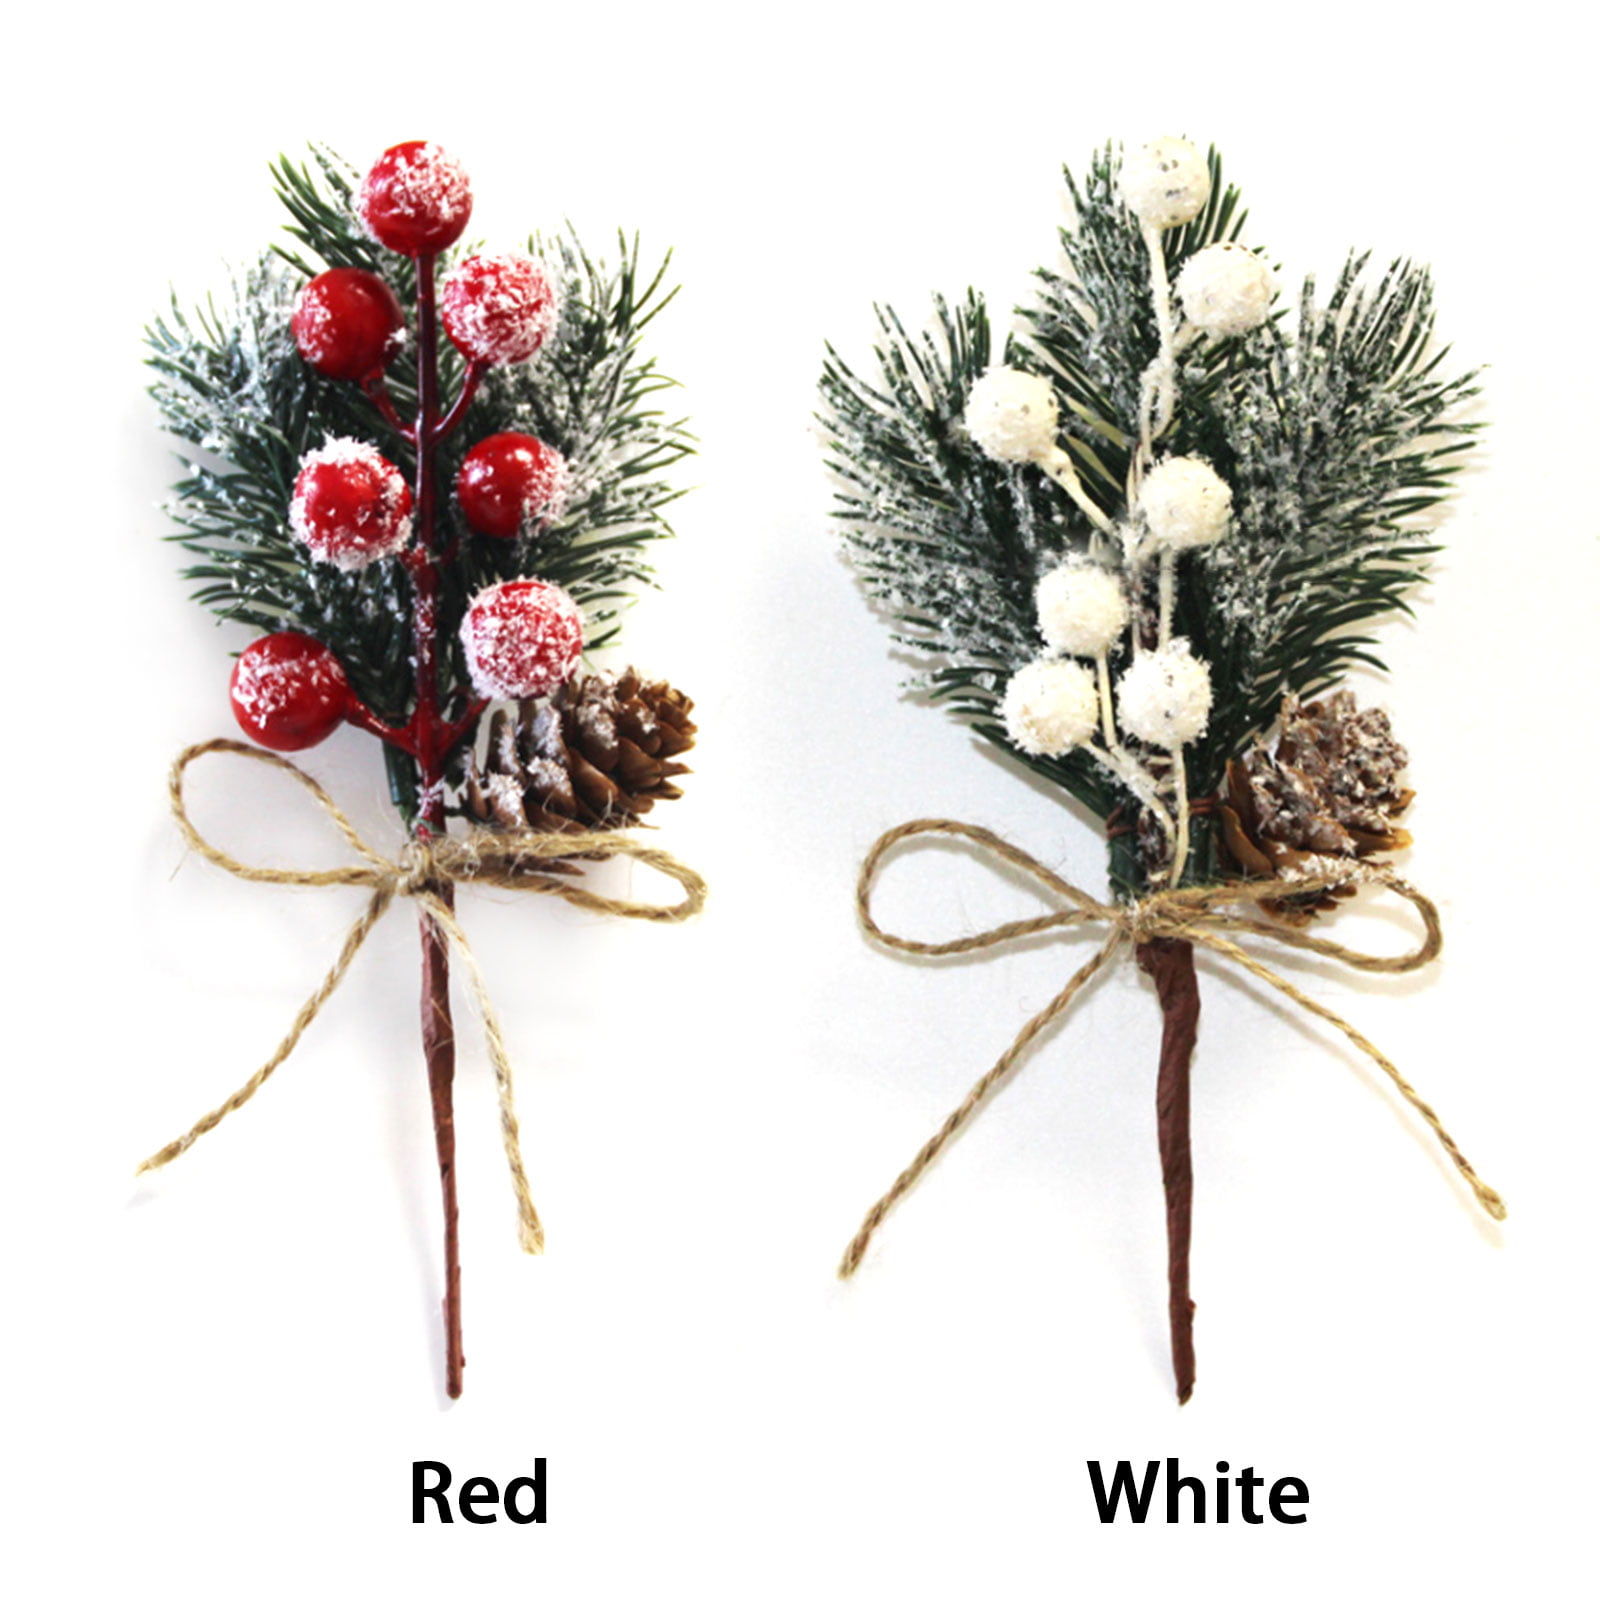 10pcs Artificial Pine Picks, Red Berry Stems with Snowflakes Flocked Holly  Artificial Pine Branches for Christmas Tree Decorations DIY Crafts Home  Decor